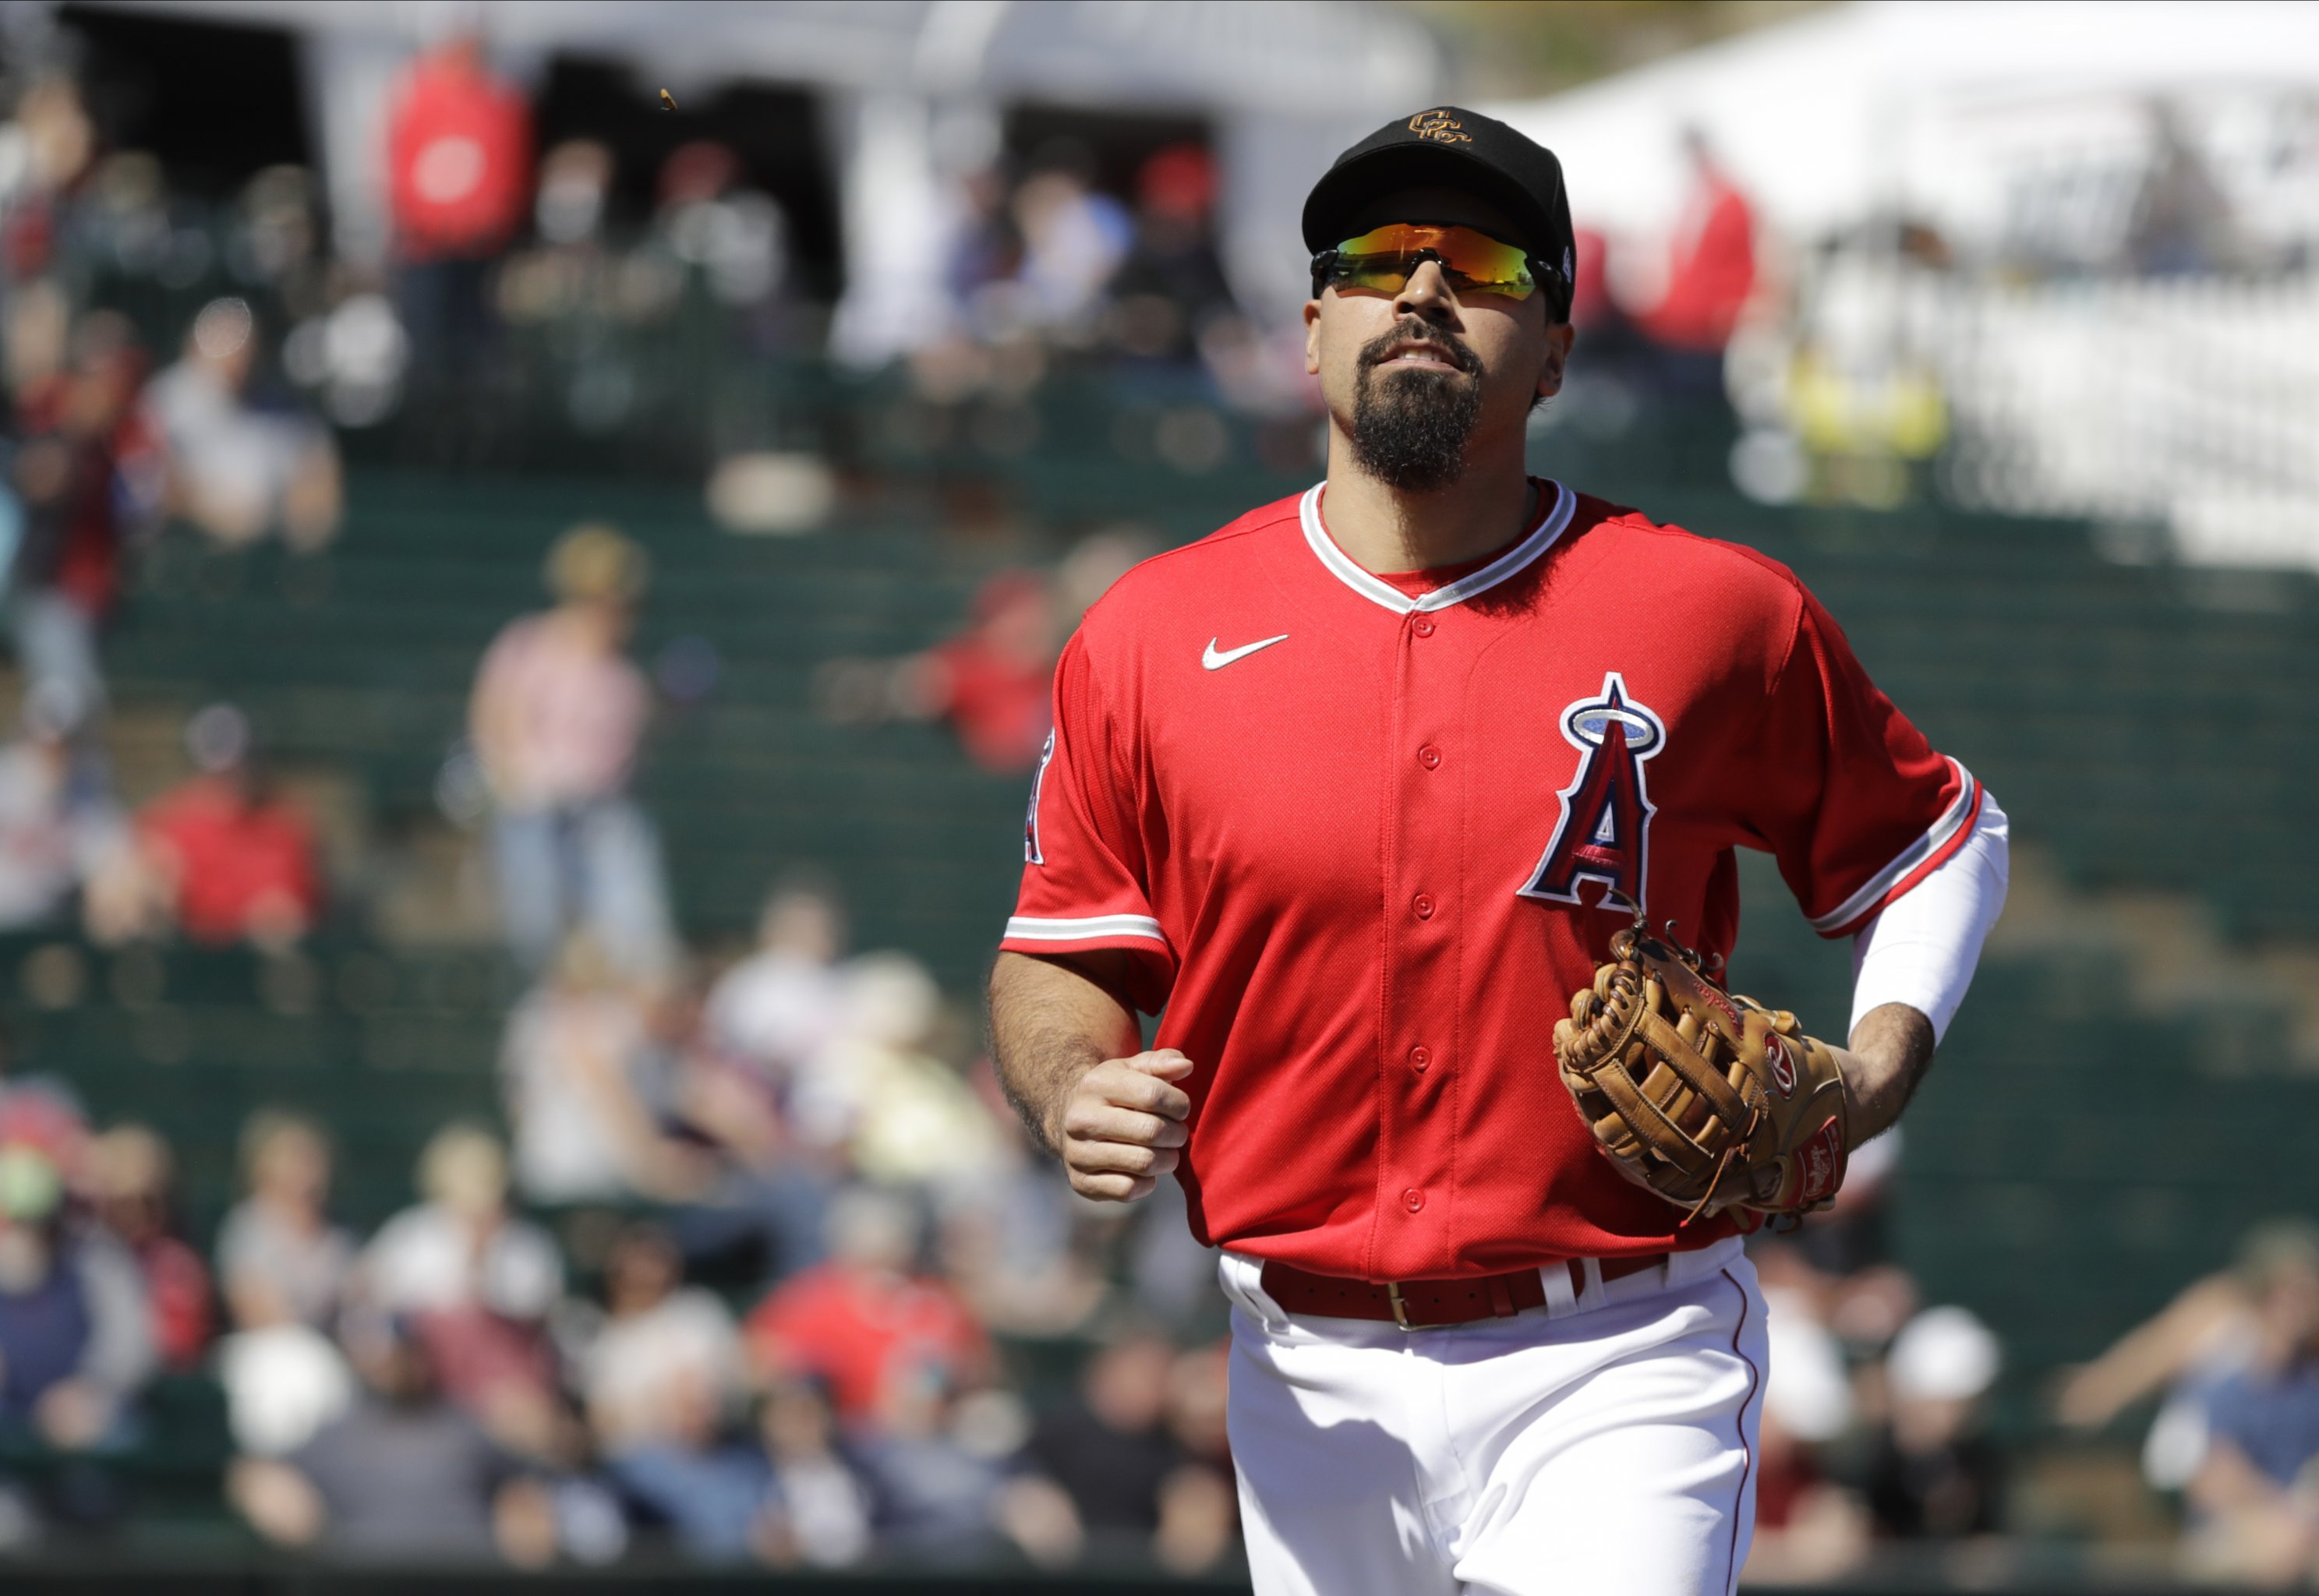 LA Angels' 3B Anthony Rendon Could be Primed for Resurgent 2023